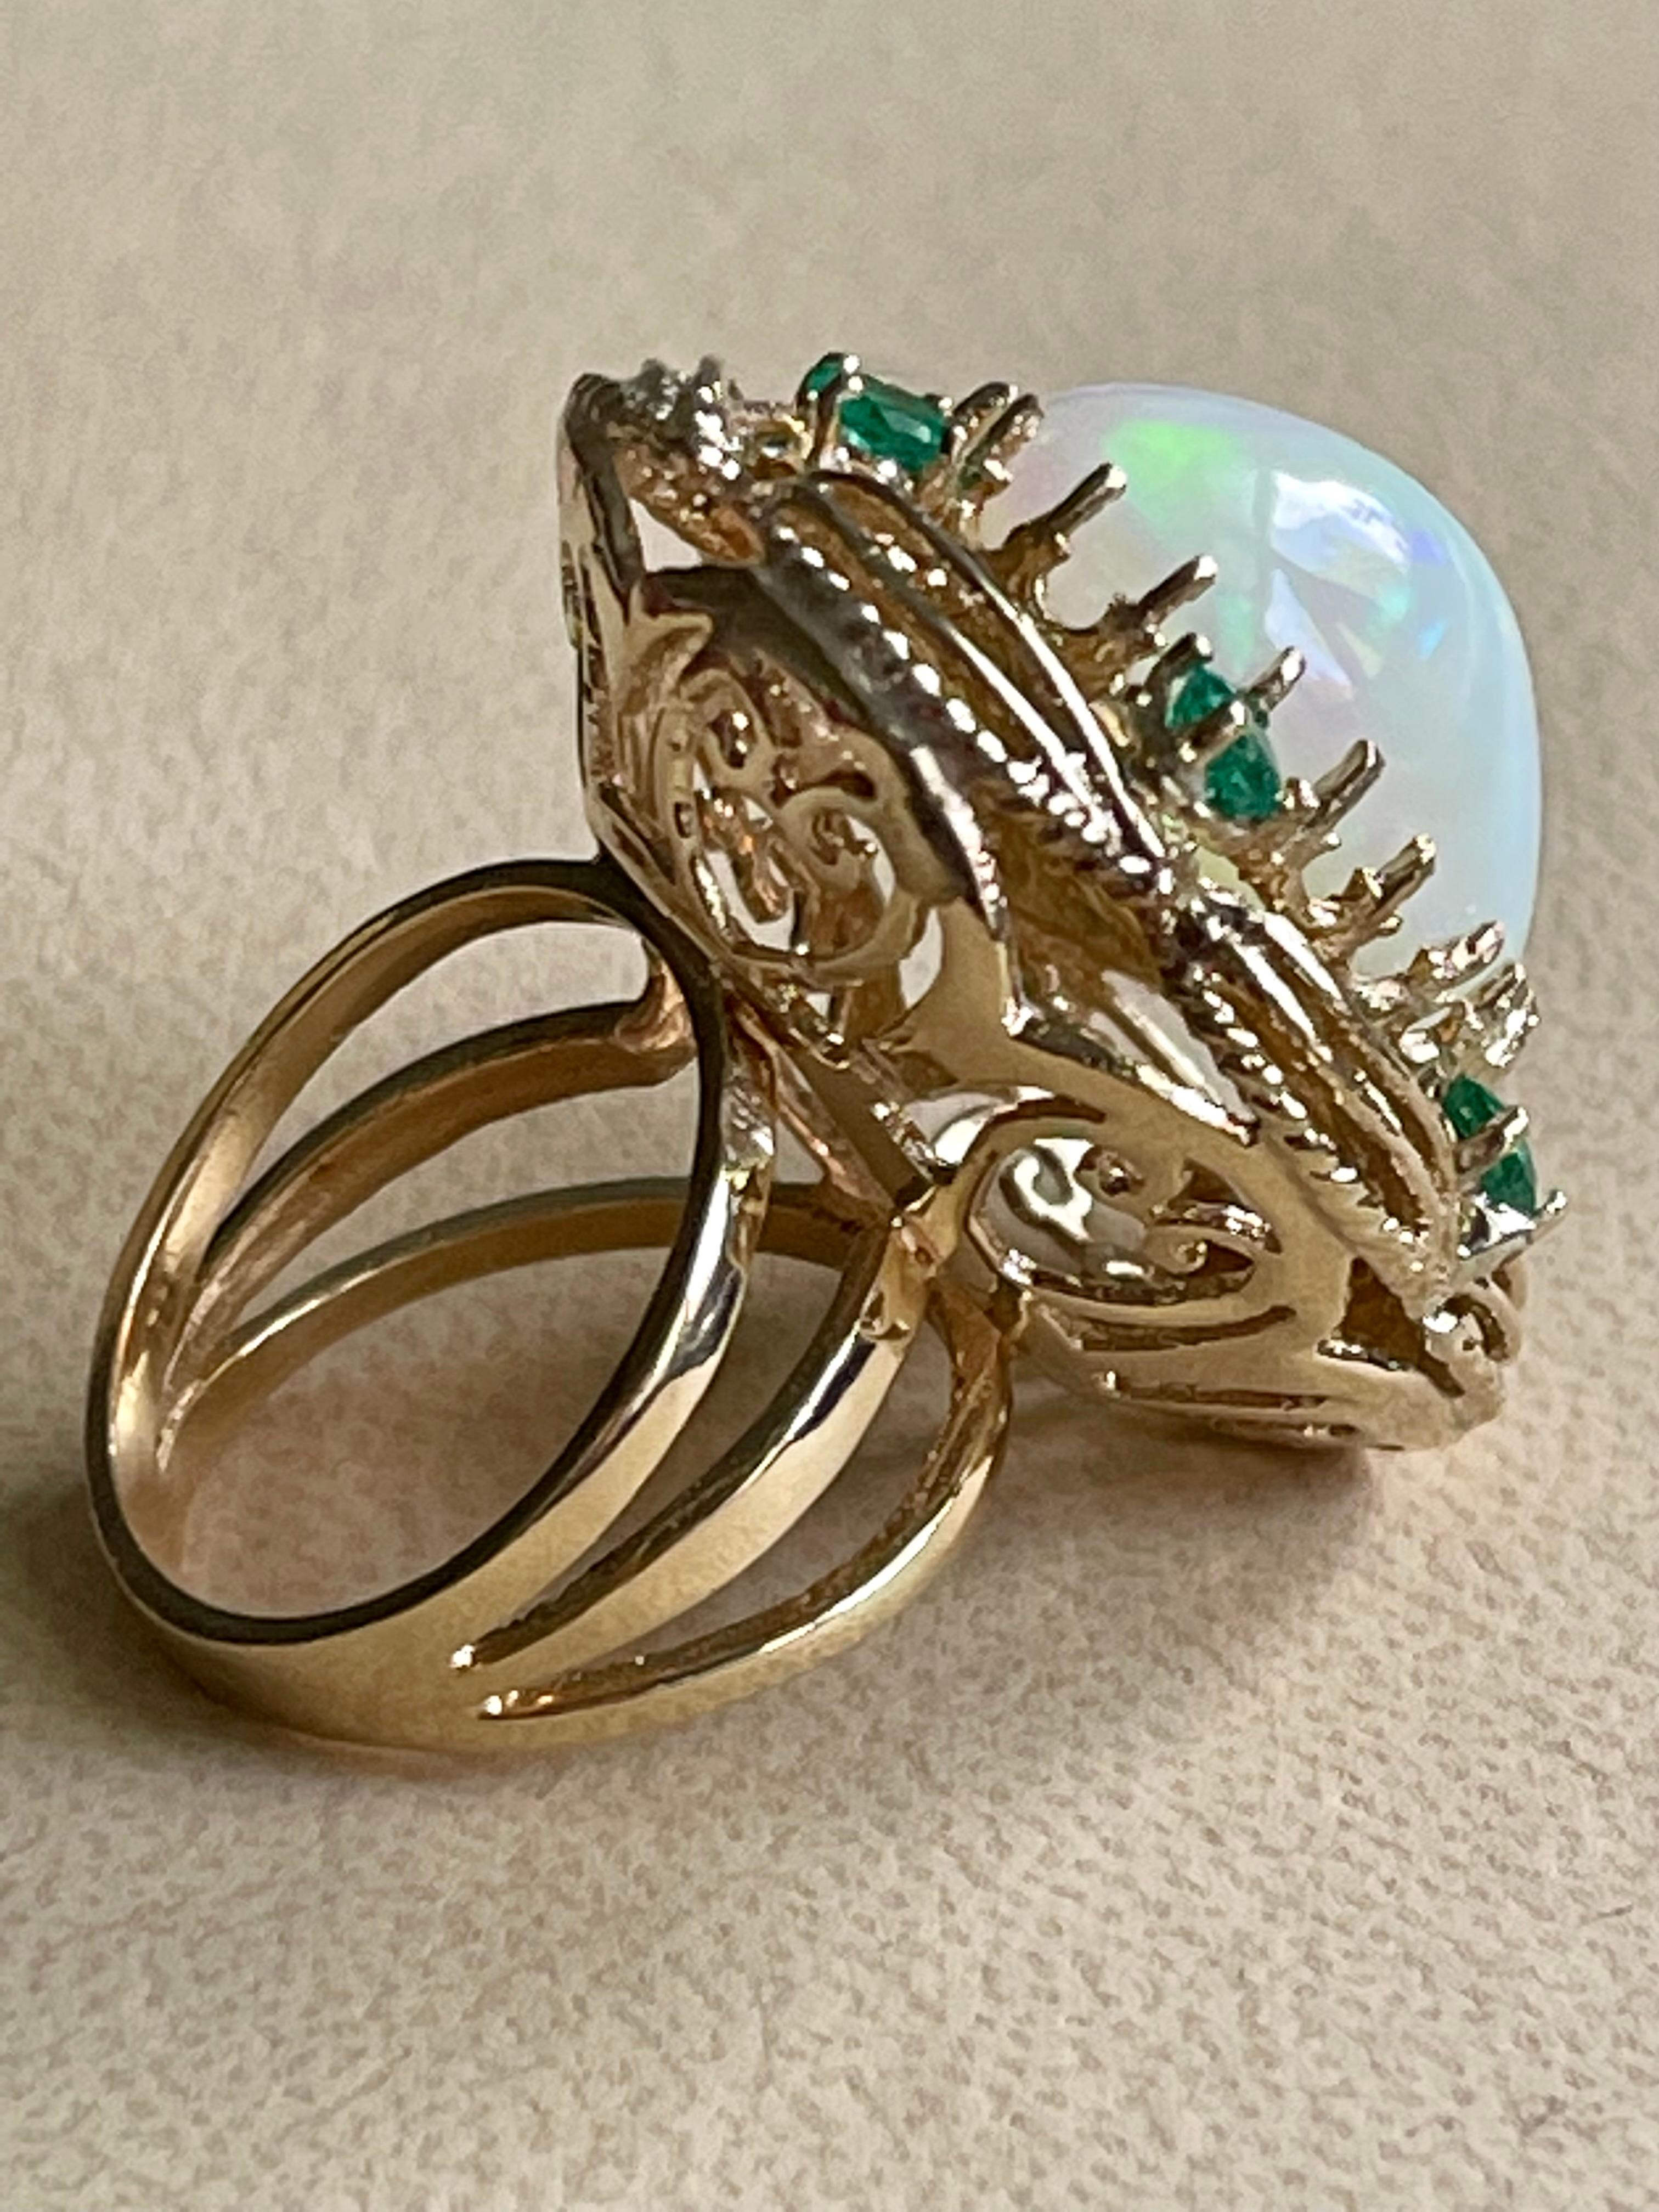 15 Carat Oval Shape Ethiopian Opal Cocktail Ring 14 Karat Yellow Gold Solid Ring In Excellent Condition For Sale In New York, NY